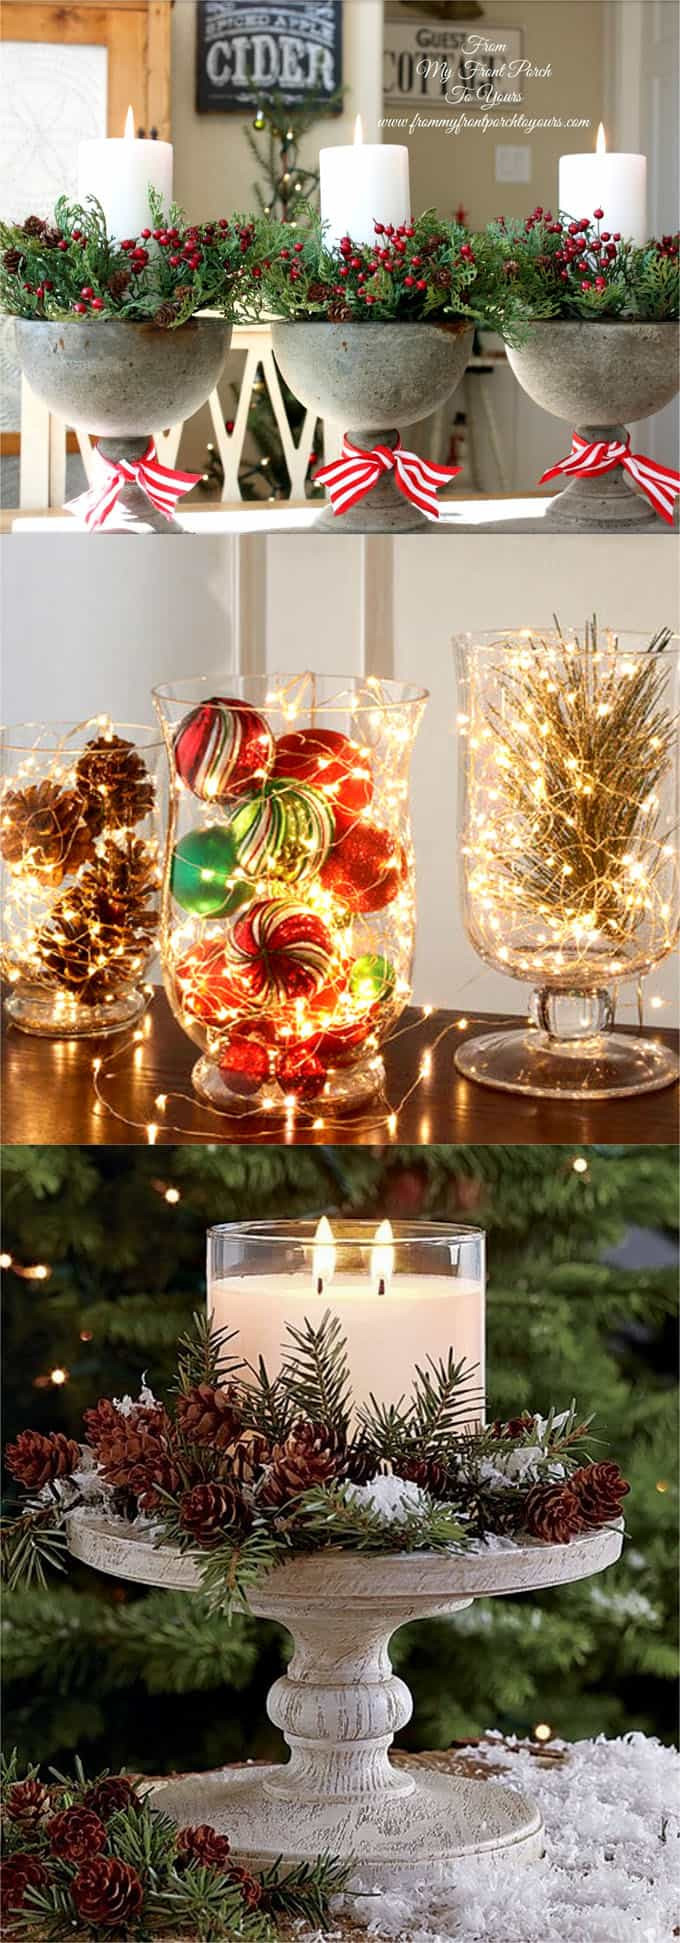 DIY Christmas Centerpieces
 27 Gorgeous DIY Thanksgiving & Christmas Table Decorations